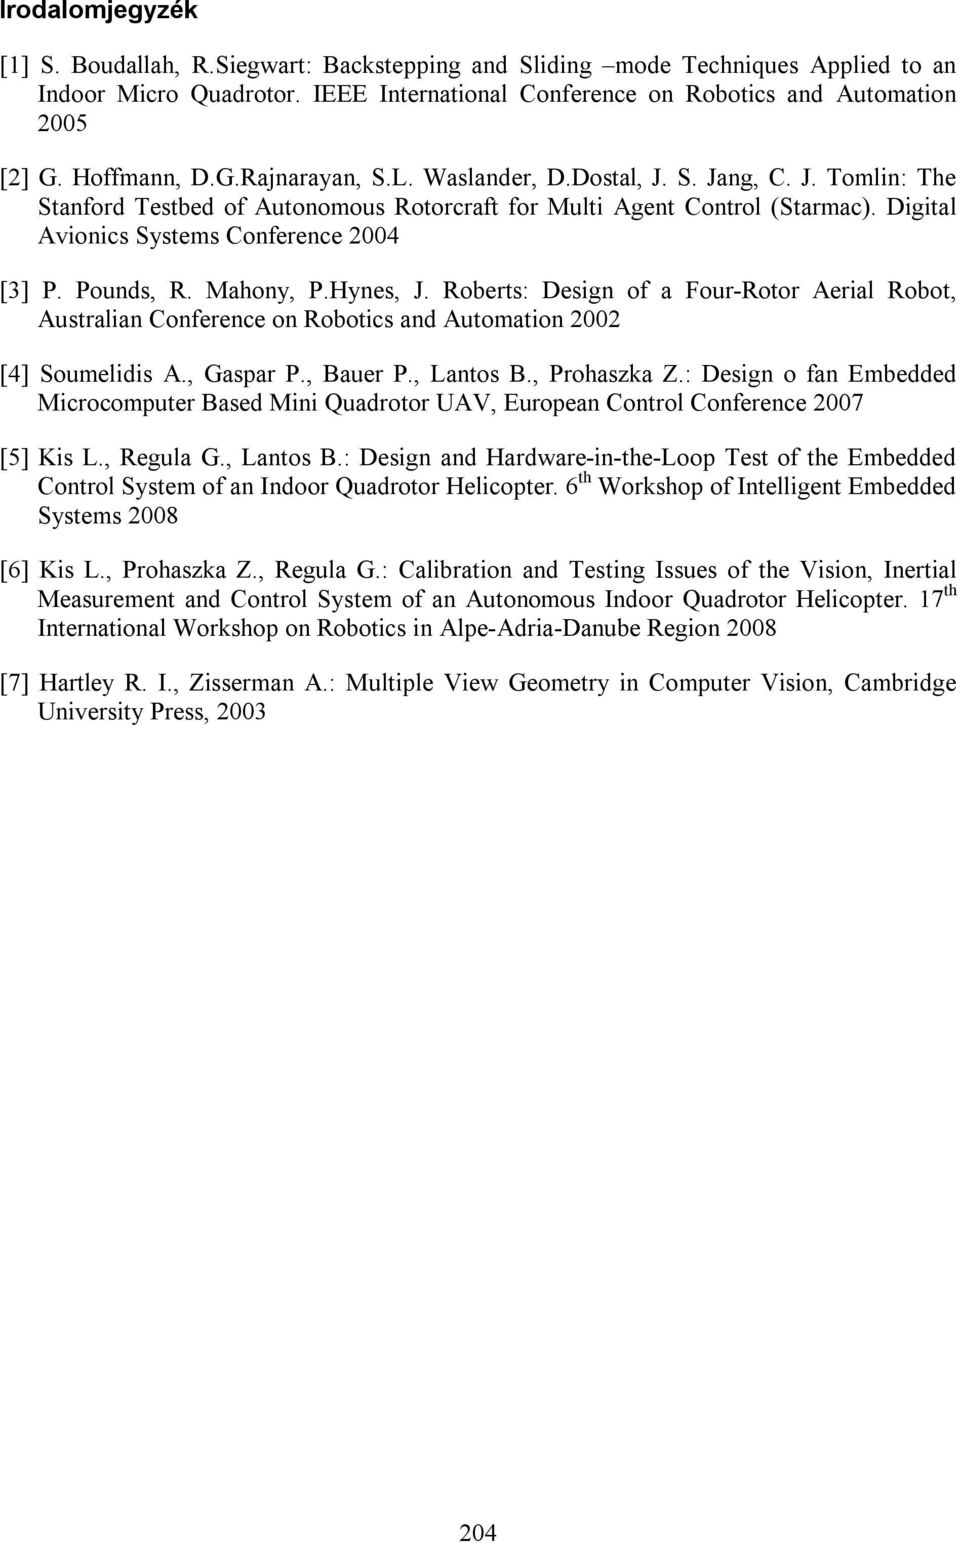 Digital Avionics Systems Conference 2004 [3] P. Pounds, R. Mahony, P.Hynes, J. Roberts: Design of a Four-Rotor Aerial Robot, Australian Conference on Robotics and Automation 2002 [4] Soumelidis A.